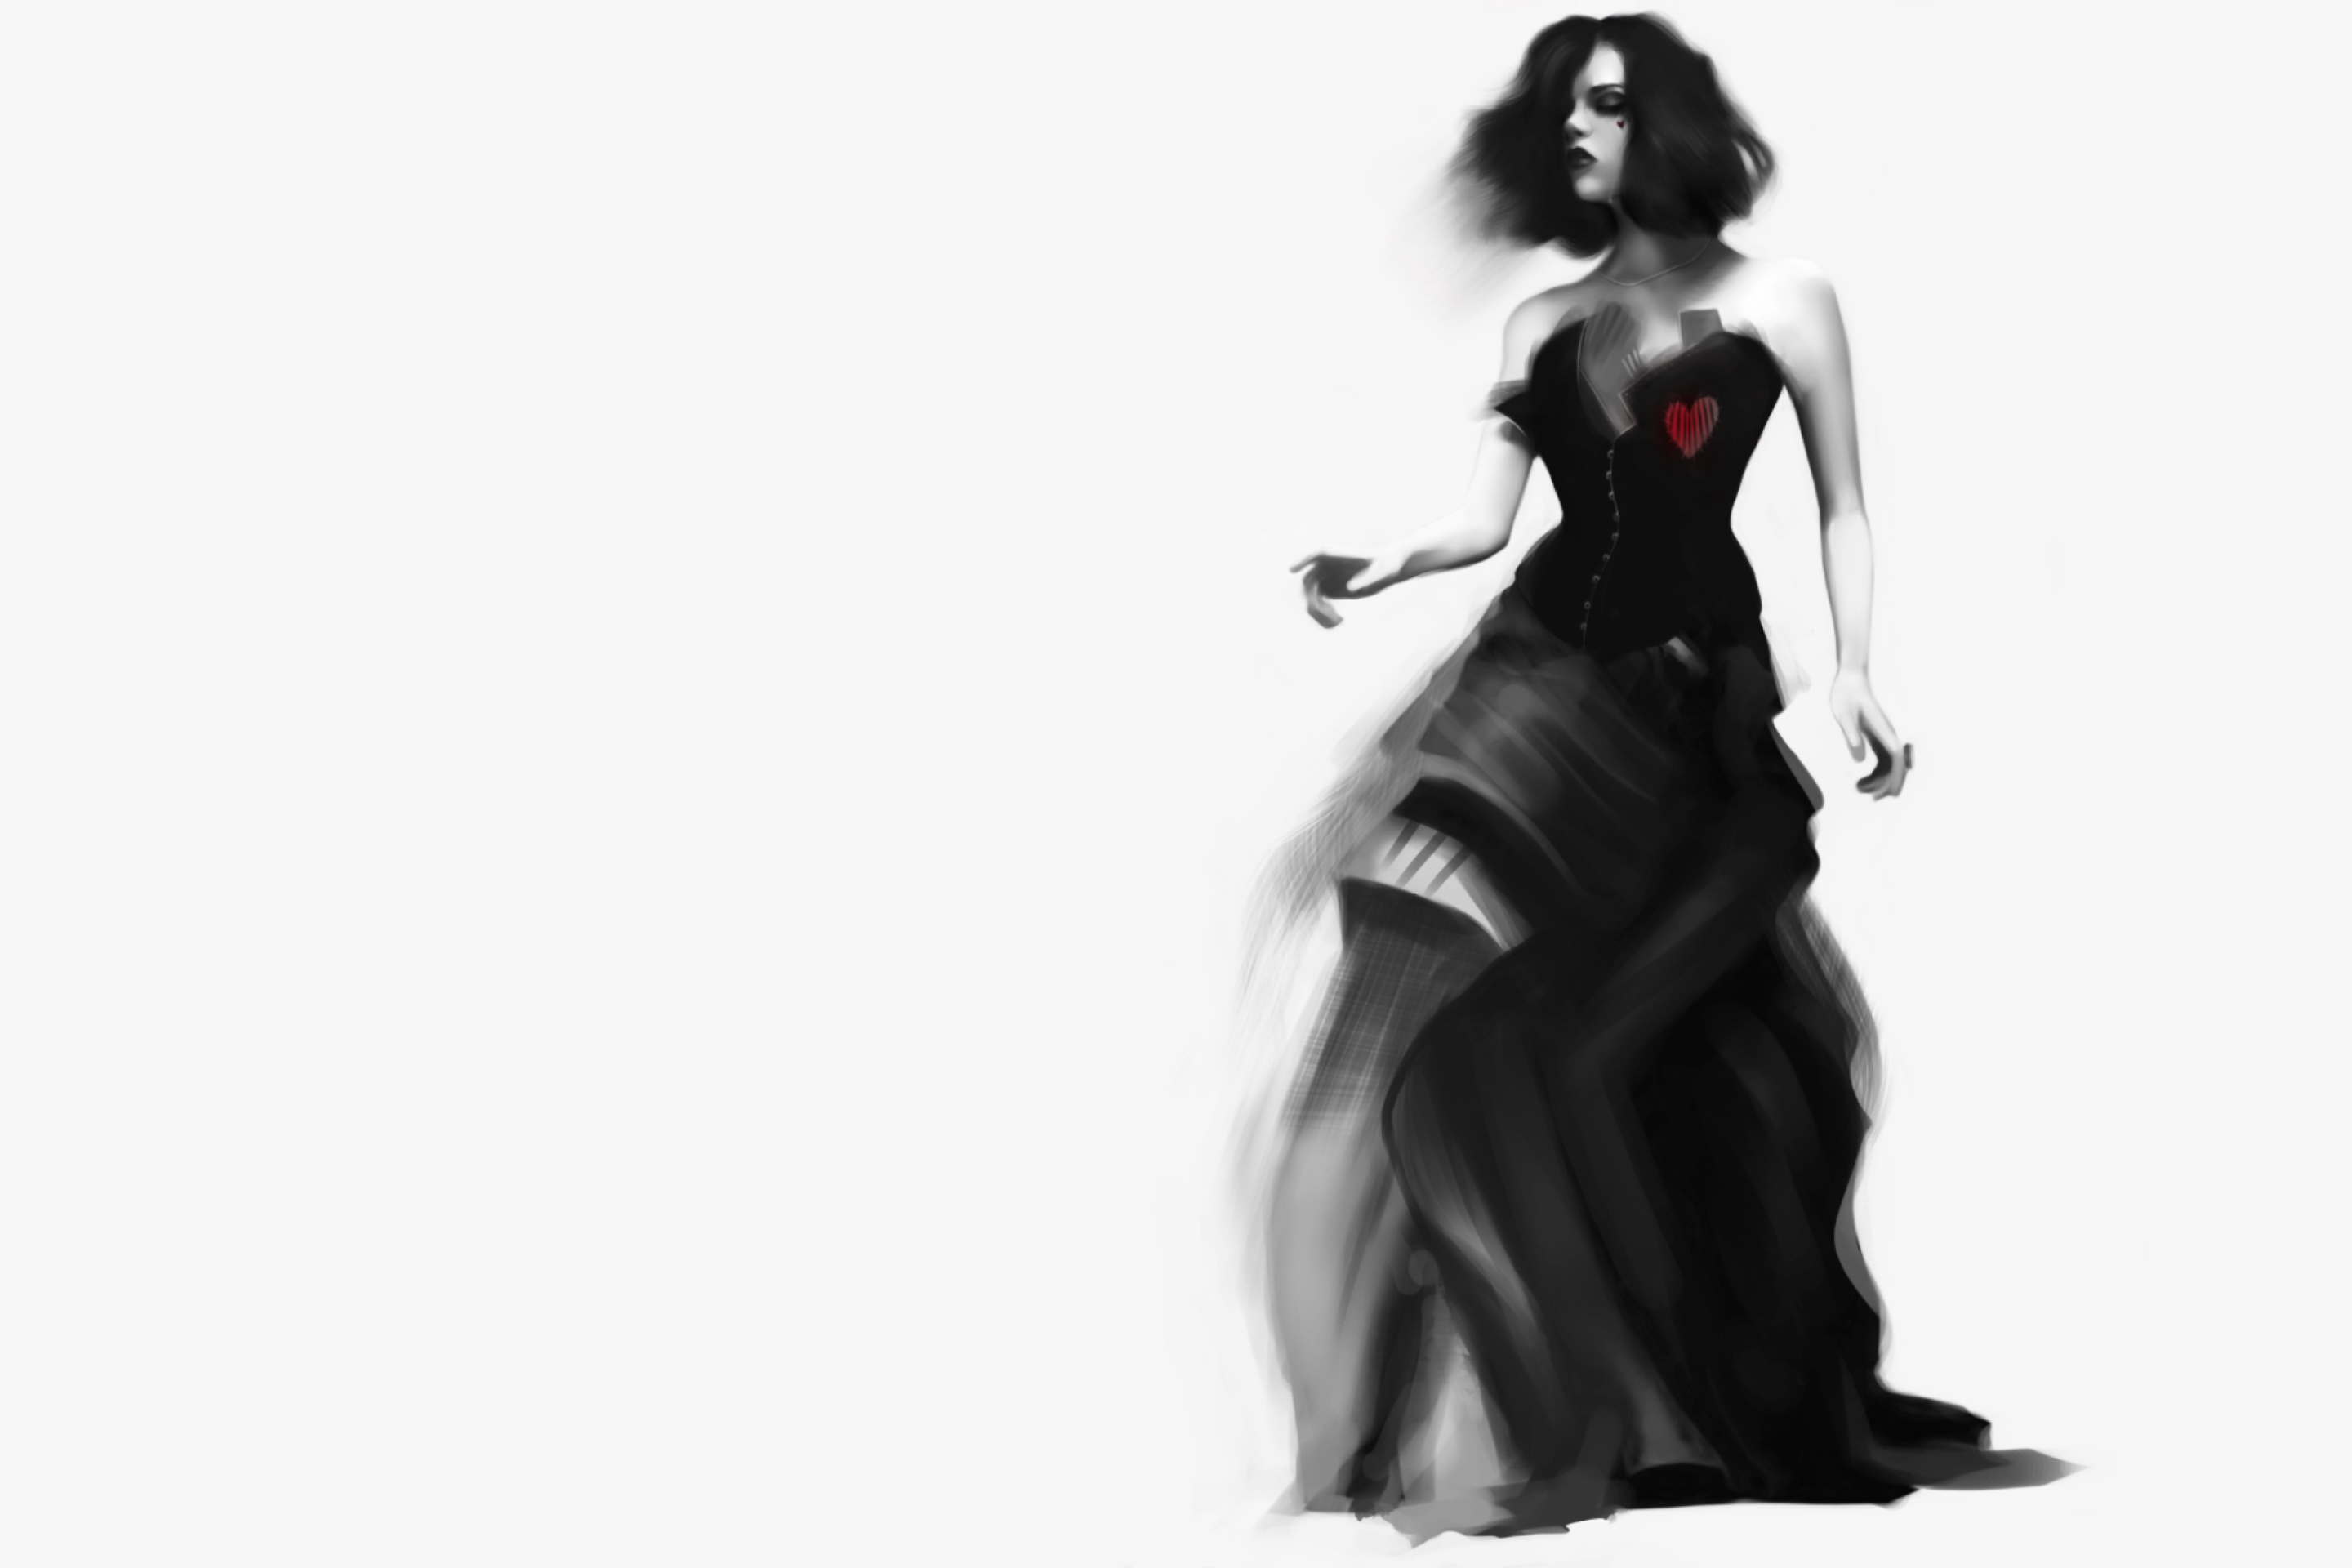 Girl Black And White Painting wallpaper 2880x1920